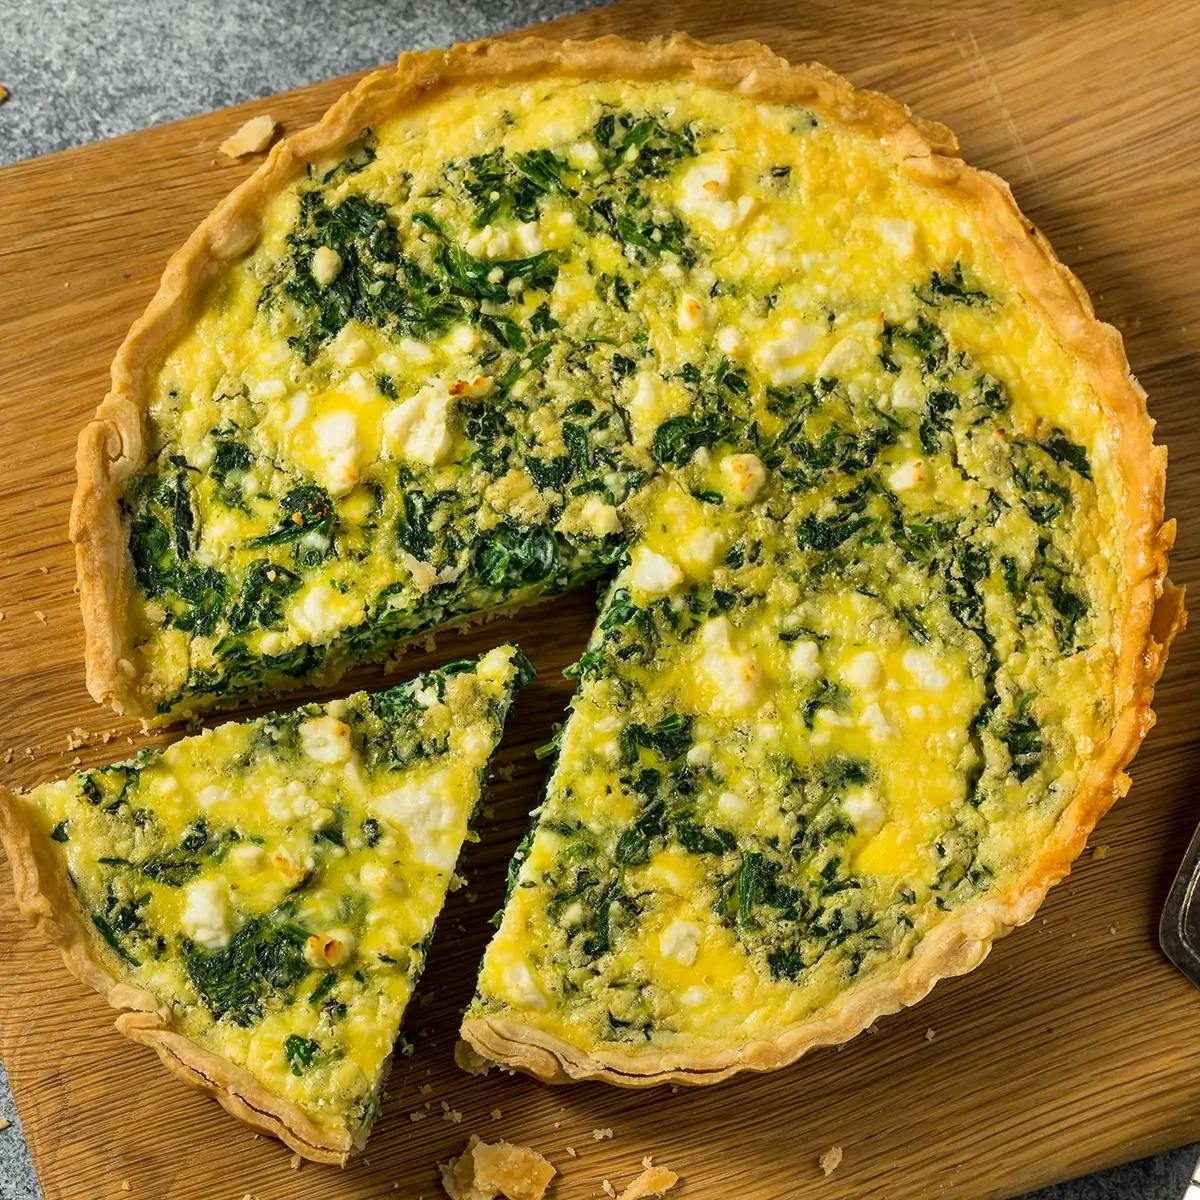 Spinach and feta quiche for Easter brunch.
